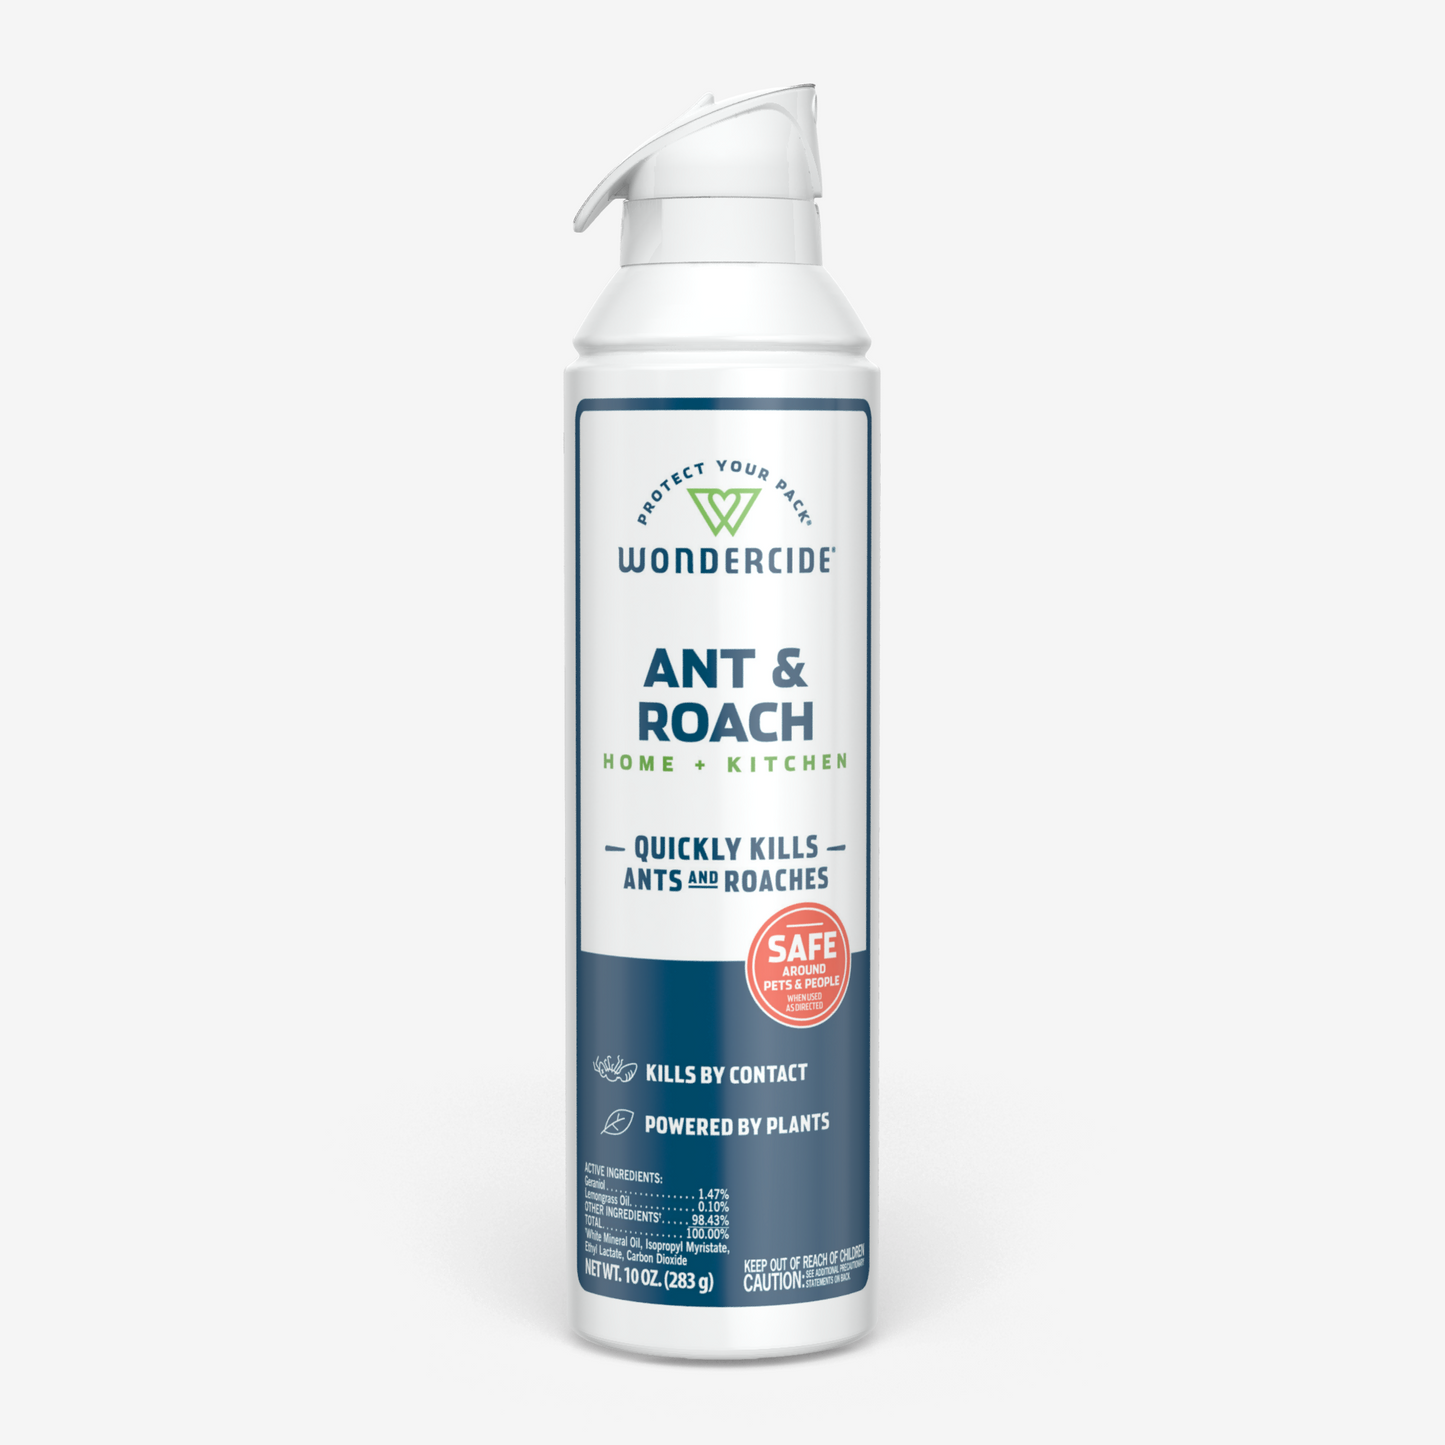 Ant & Roach for Home + Kitchen with Natural Essential Oils